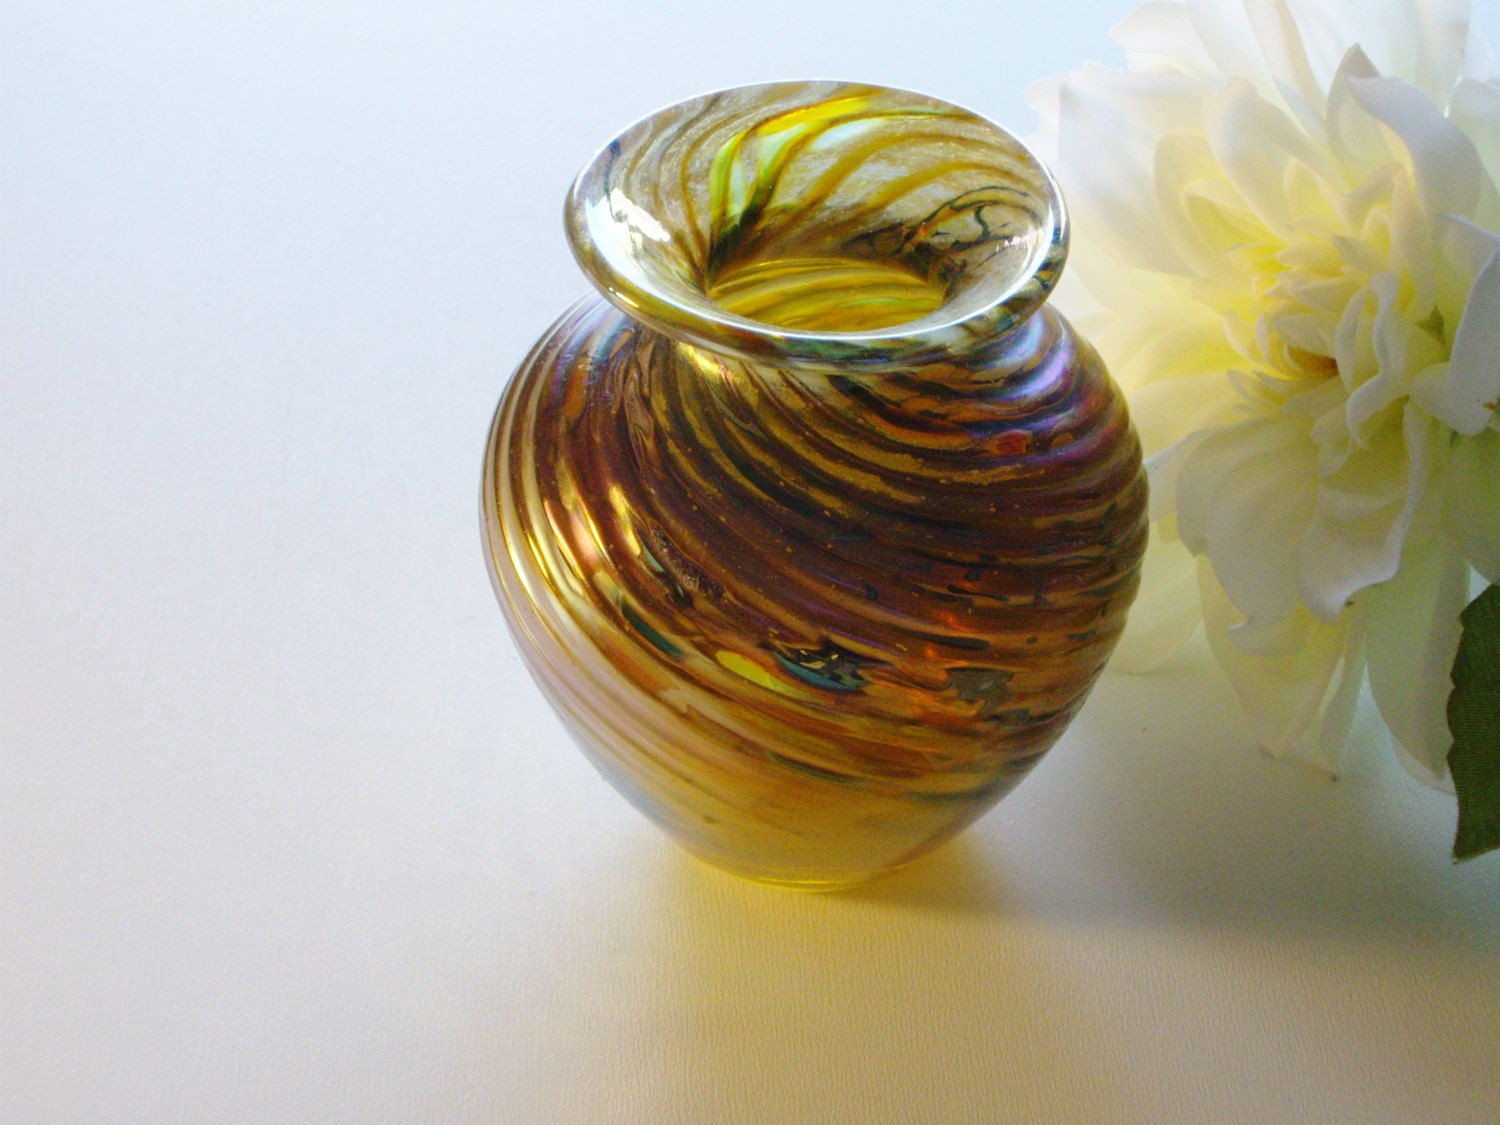 12 Nice Small Hand Blown Glass Vases 2022 free download small hand blown glass vases of vintage art glass vase small metallic swirls hand blown gold by intended for vintage art glass vase small metallic swirls hand blown gold by vintagerous on et